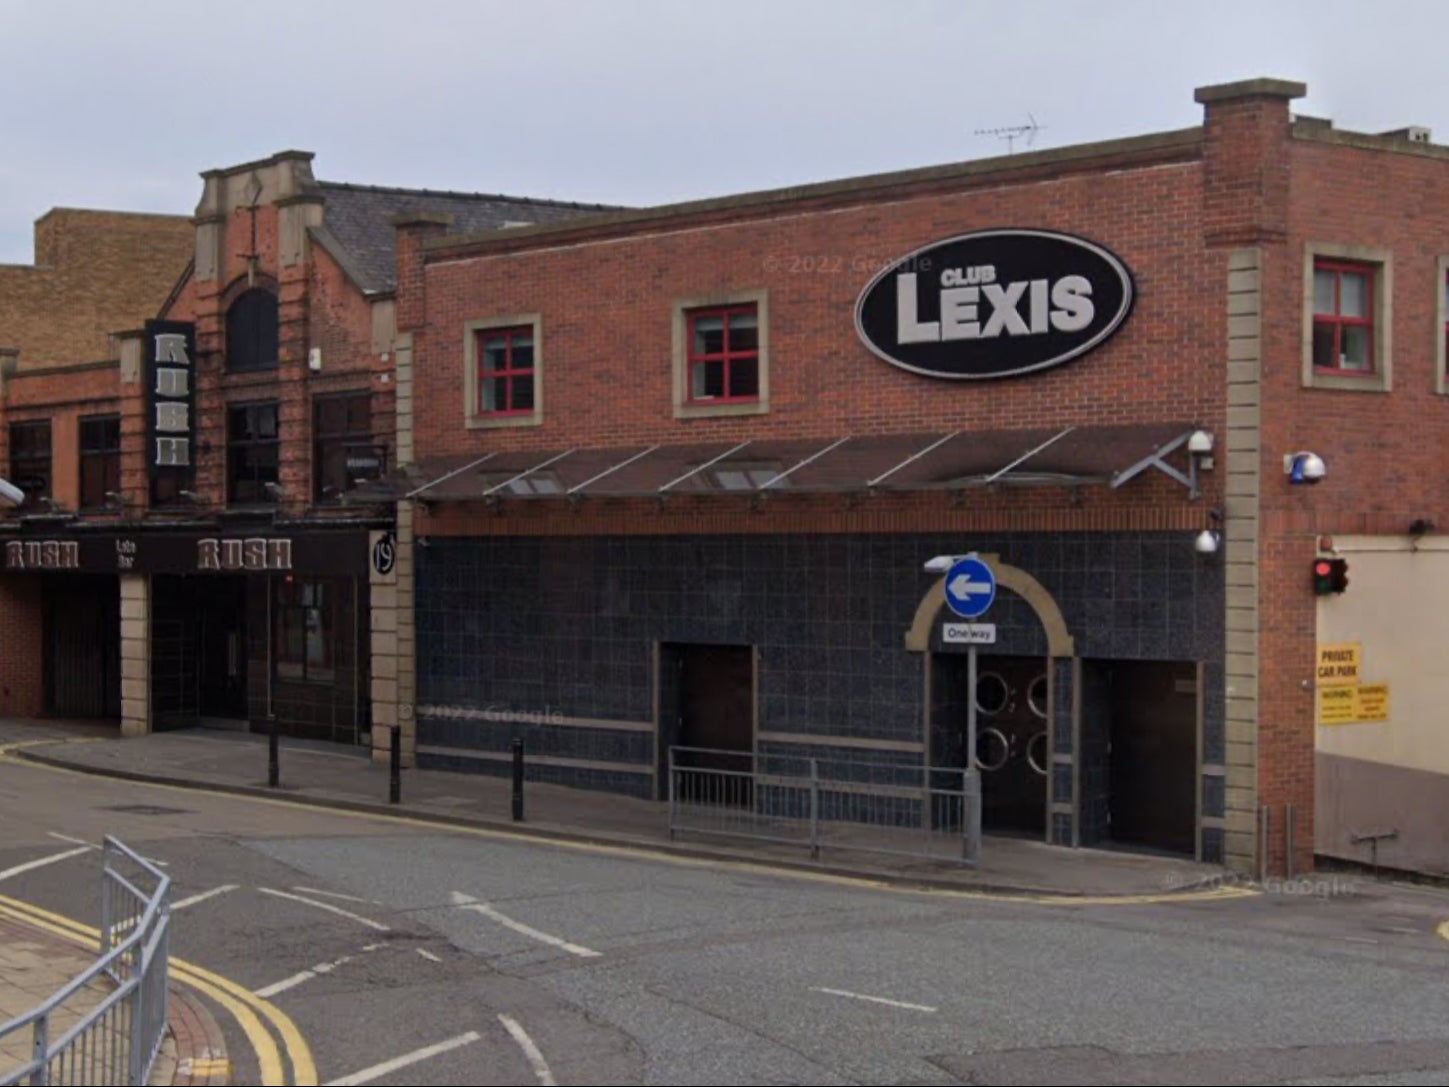 Club Nexis in Mansfield, where police said a man had part of his ear bitten off in an attack